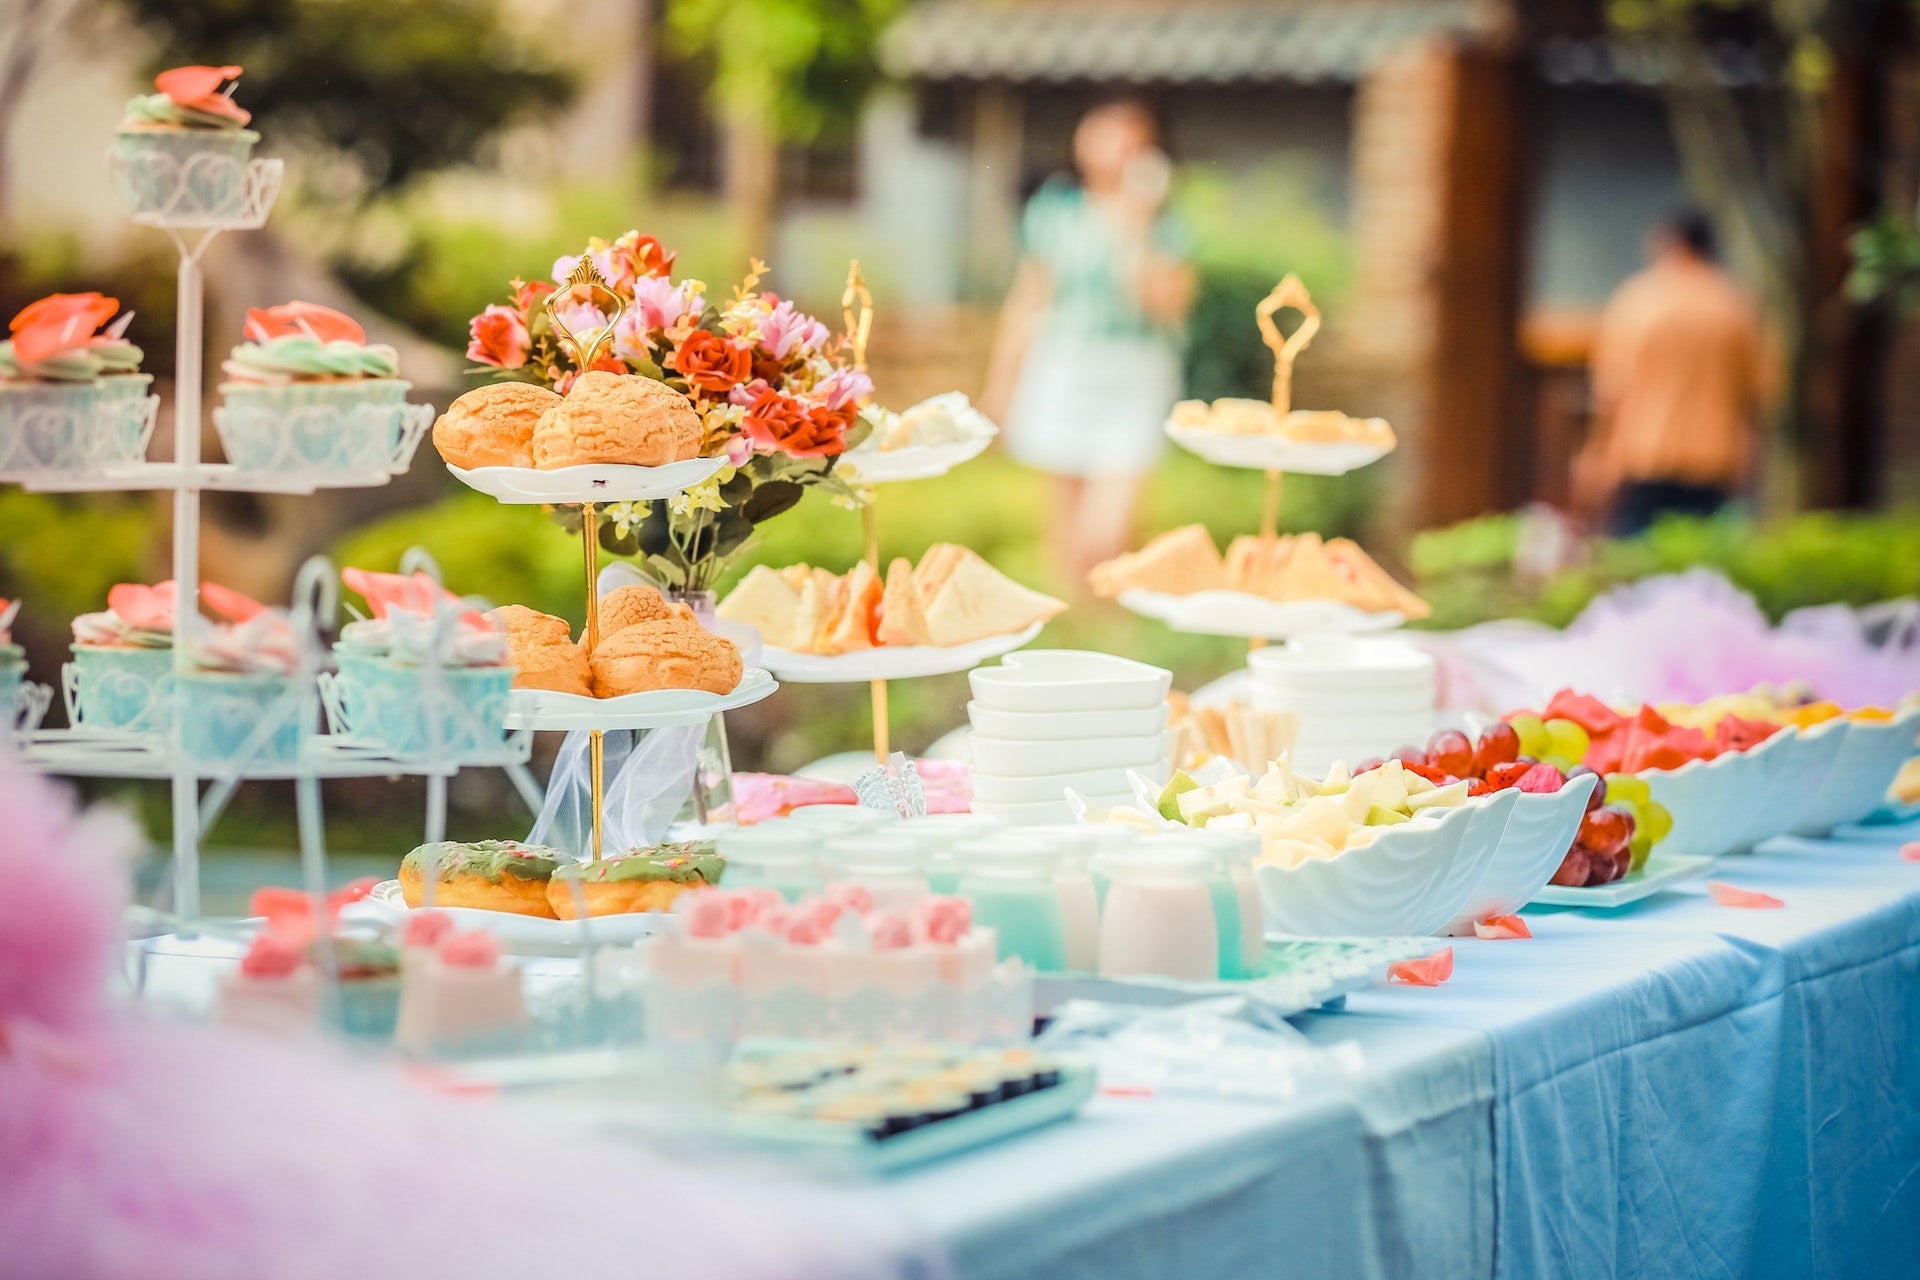 Food Items Which are Essential for Every Wedding